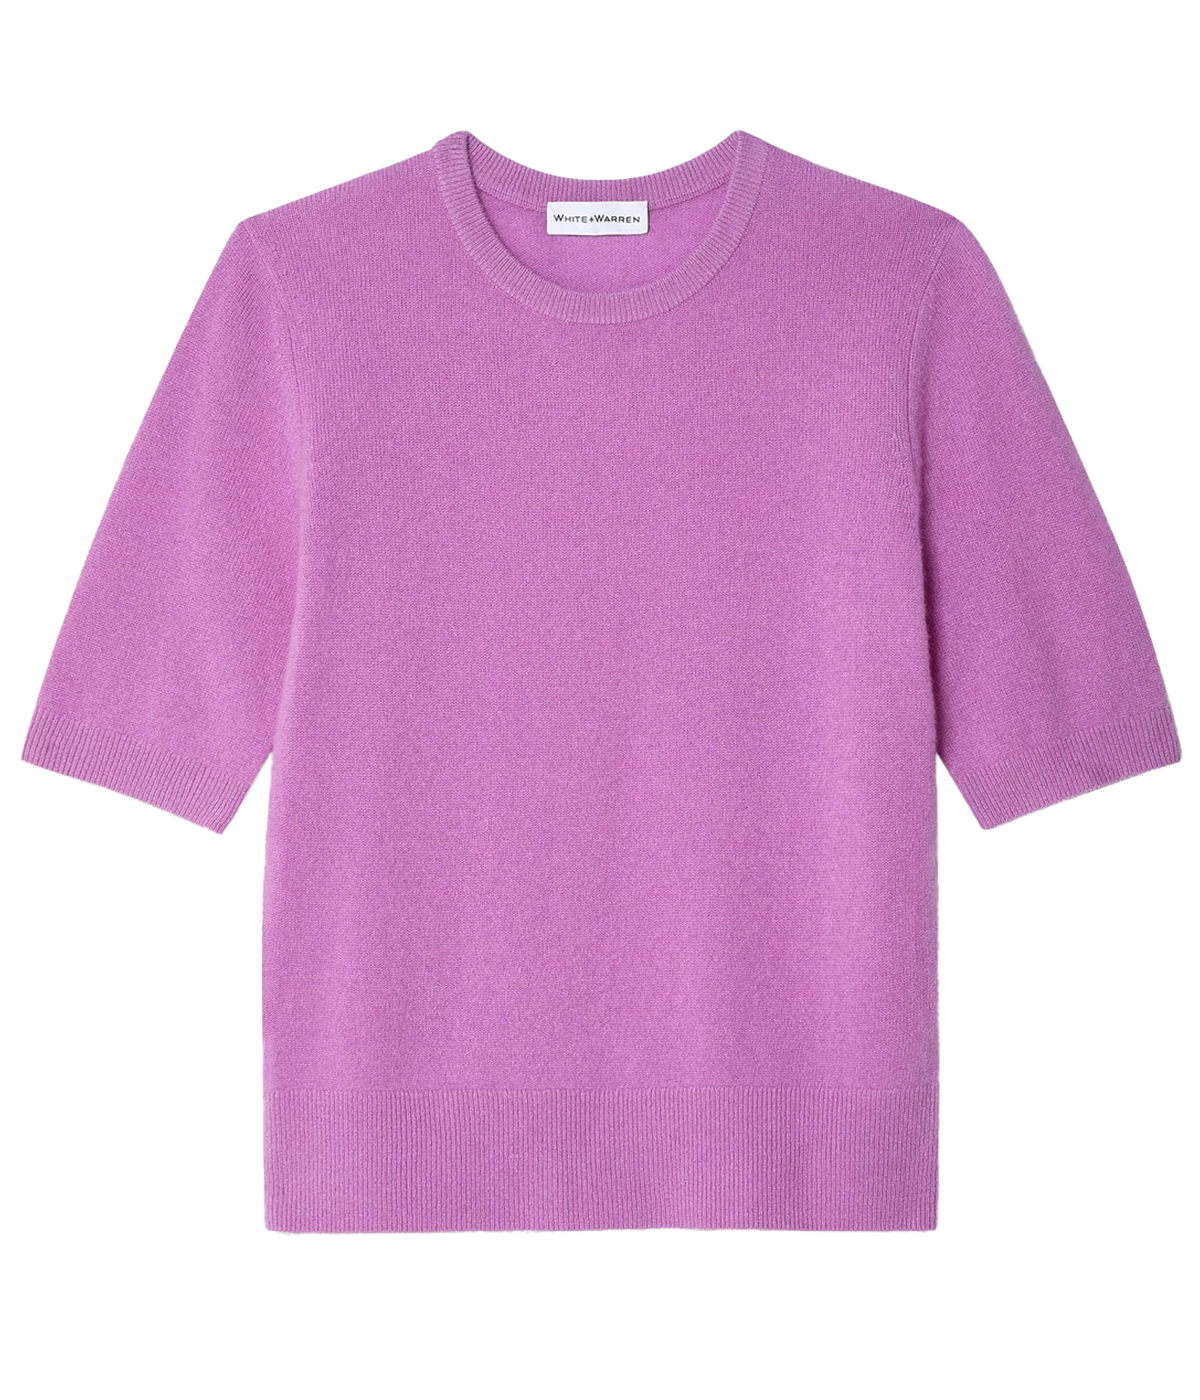 Cashmere Elbow Sleeve Tee in Lilac